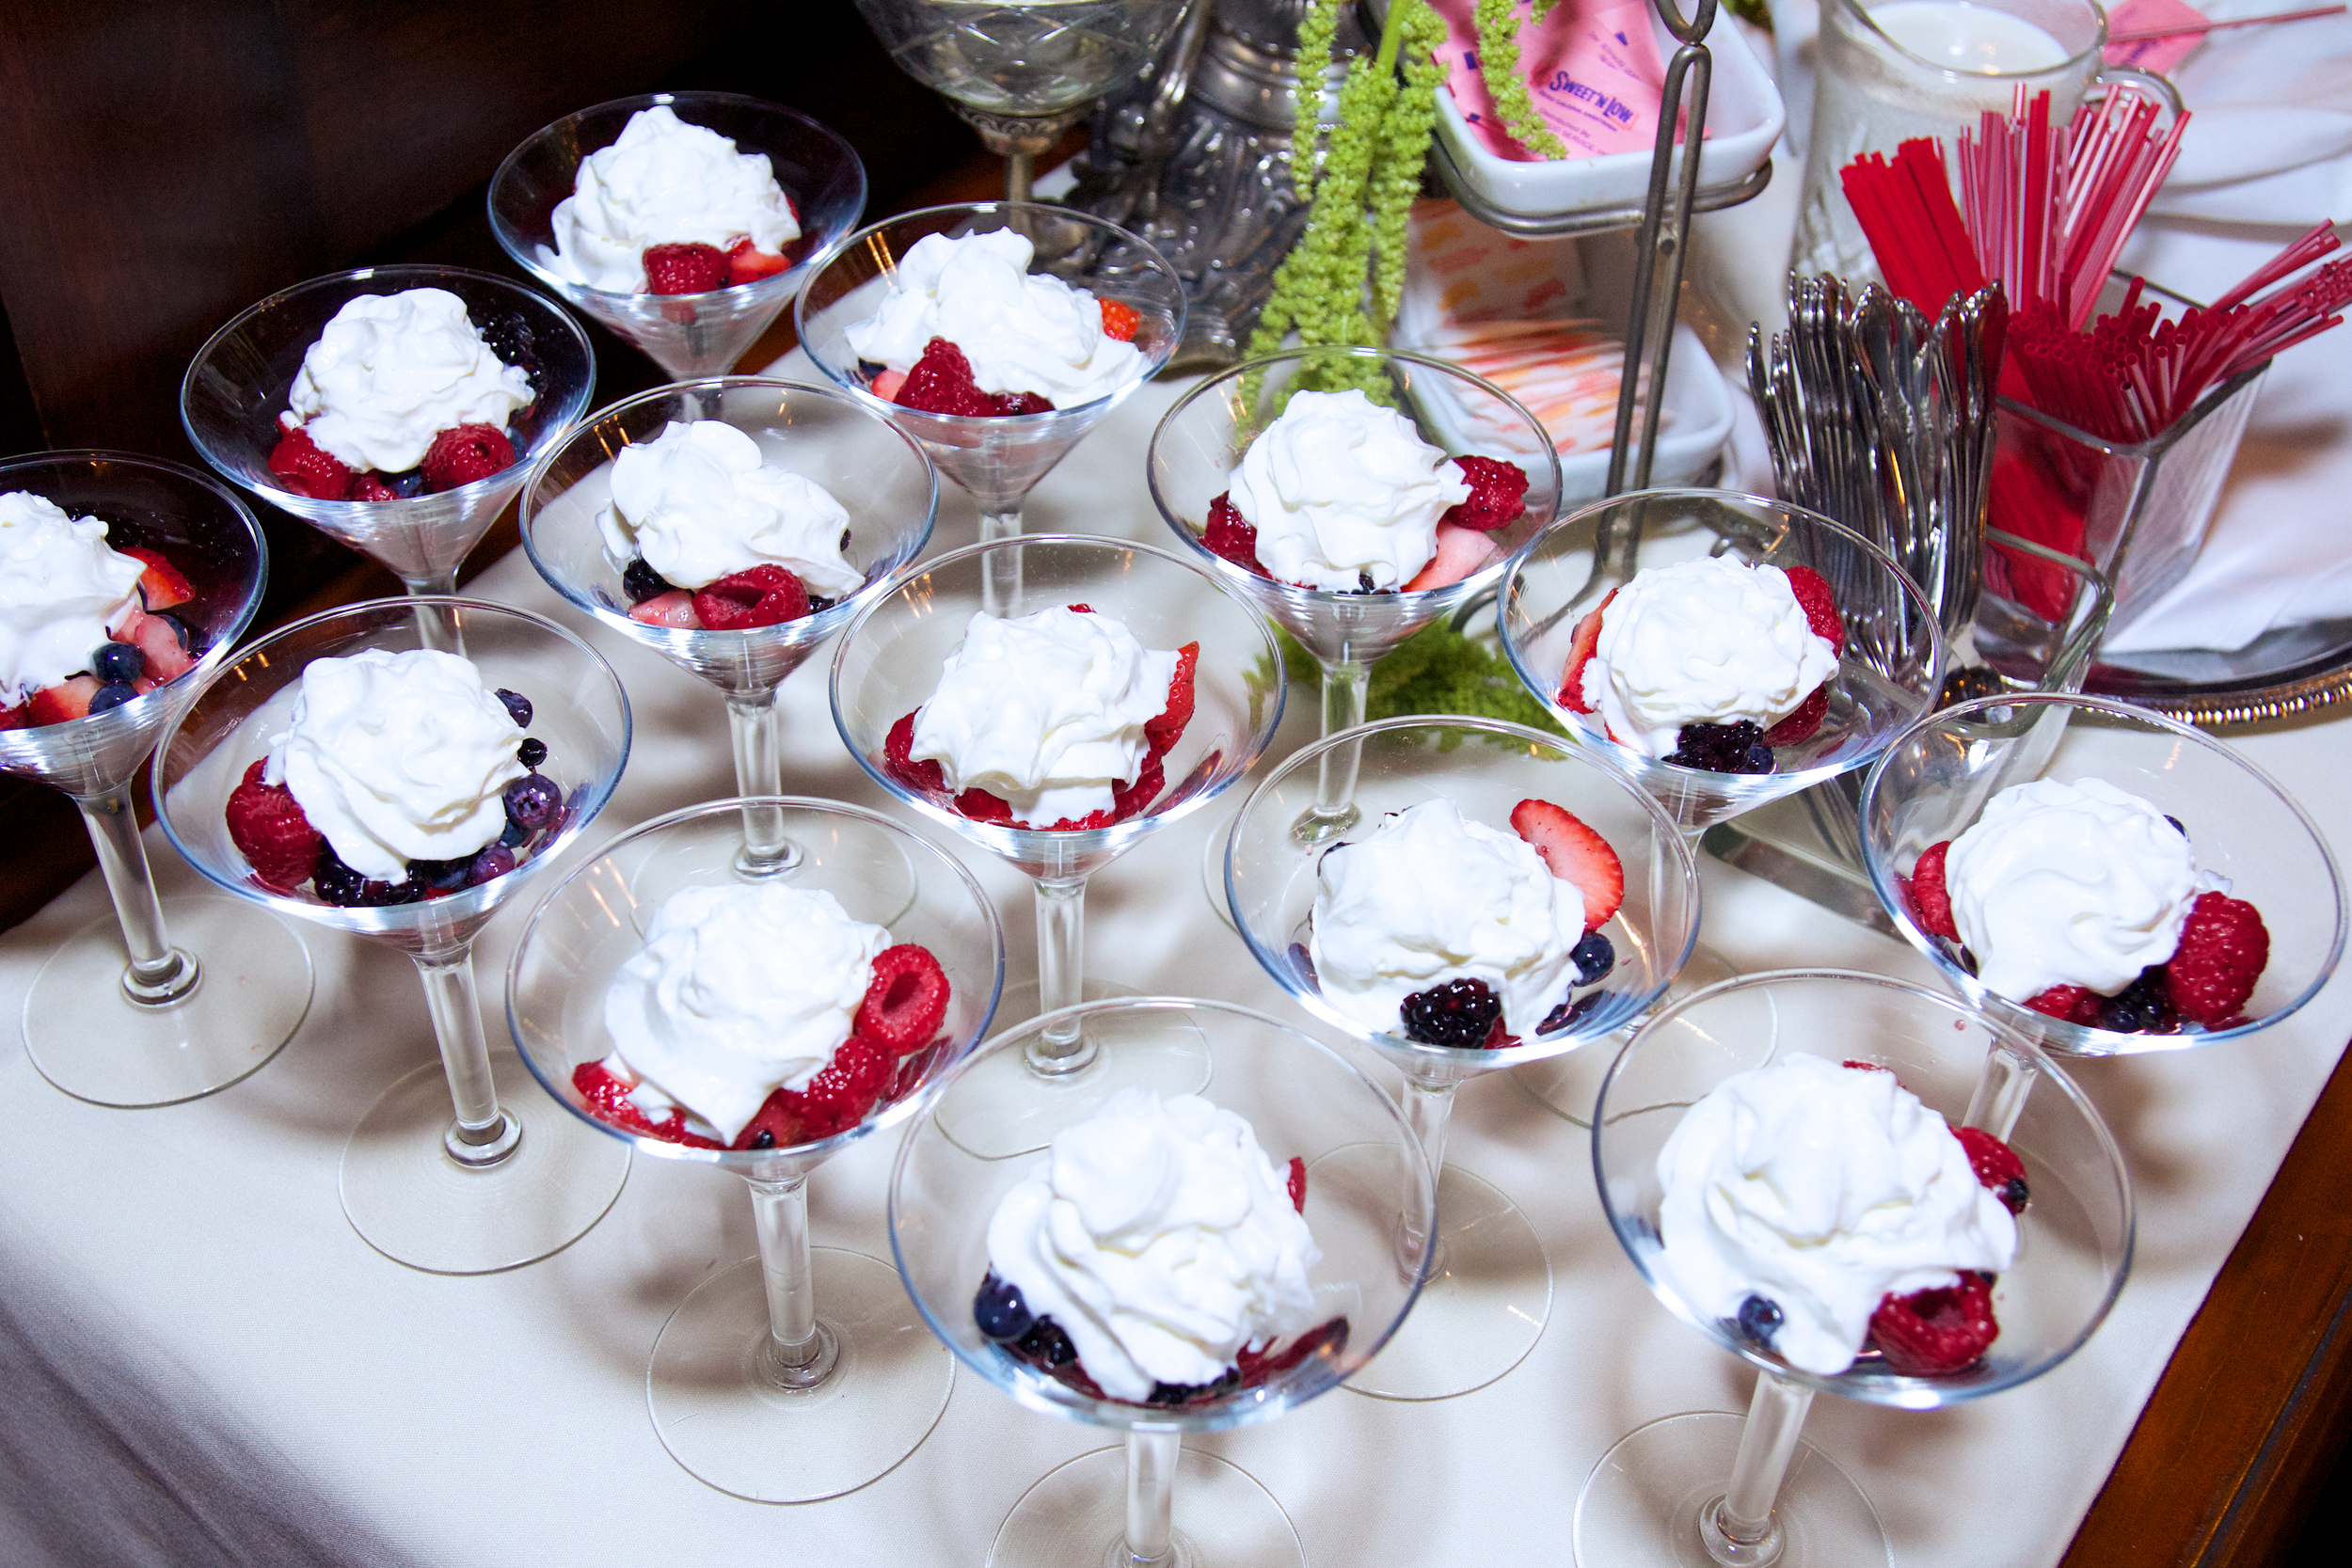  Fresh Berries with Grand Marnier Infused Whipped Cream&nbsp; 